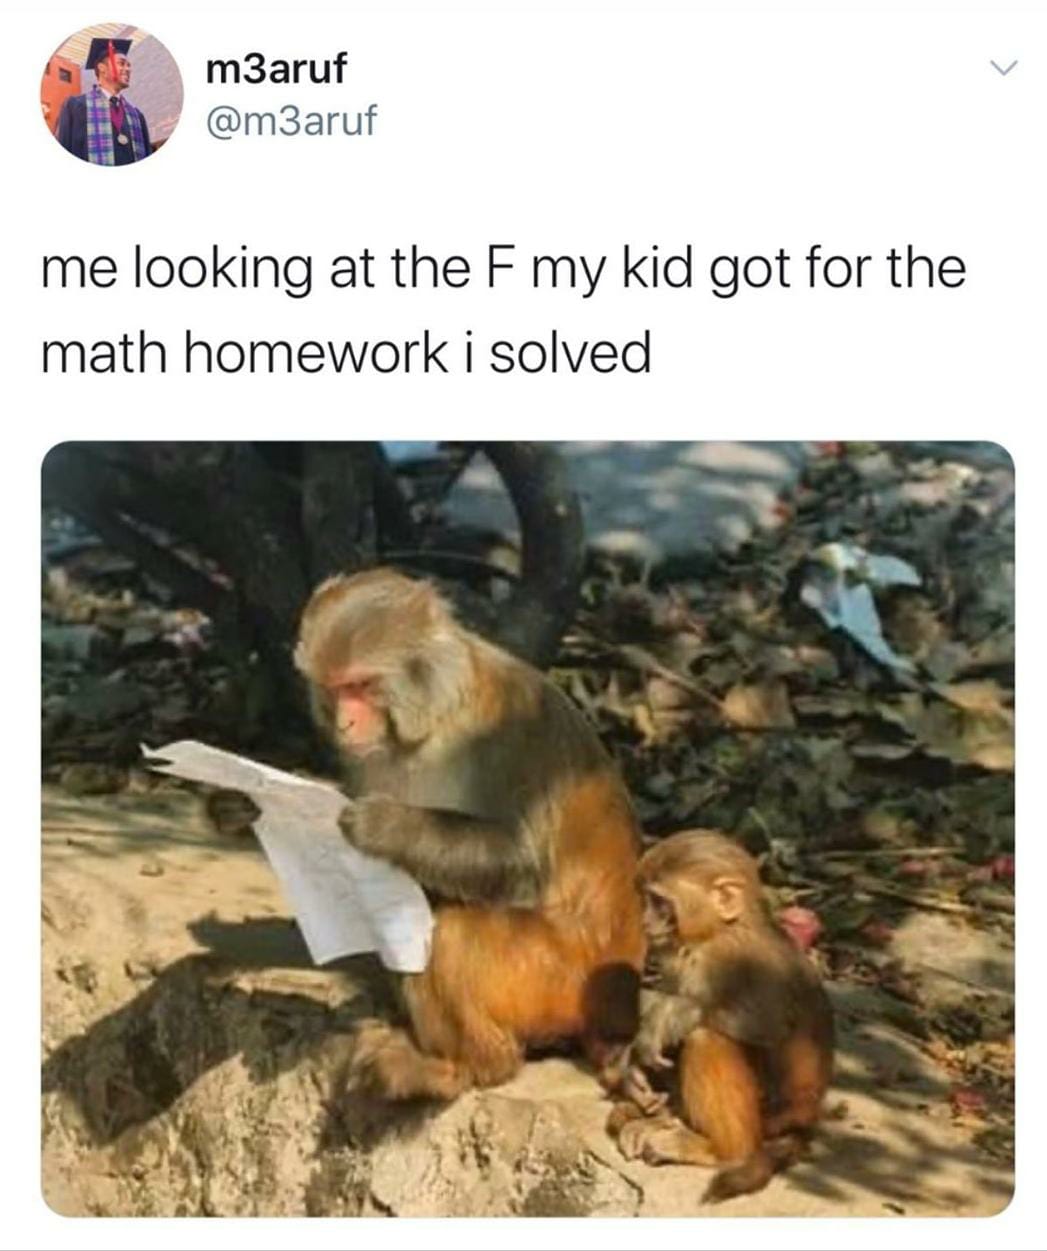 monkey funny exam - Cik m3aruf m3aruf me looking at the Fmy kid got for the math homework i solved